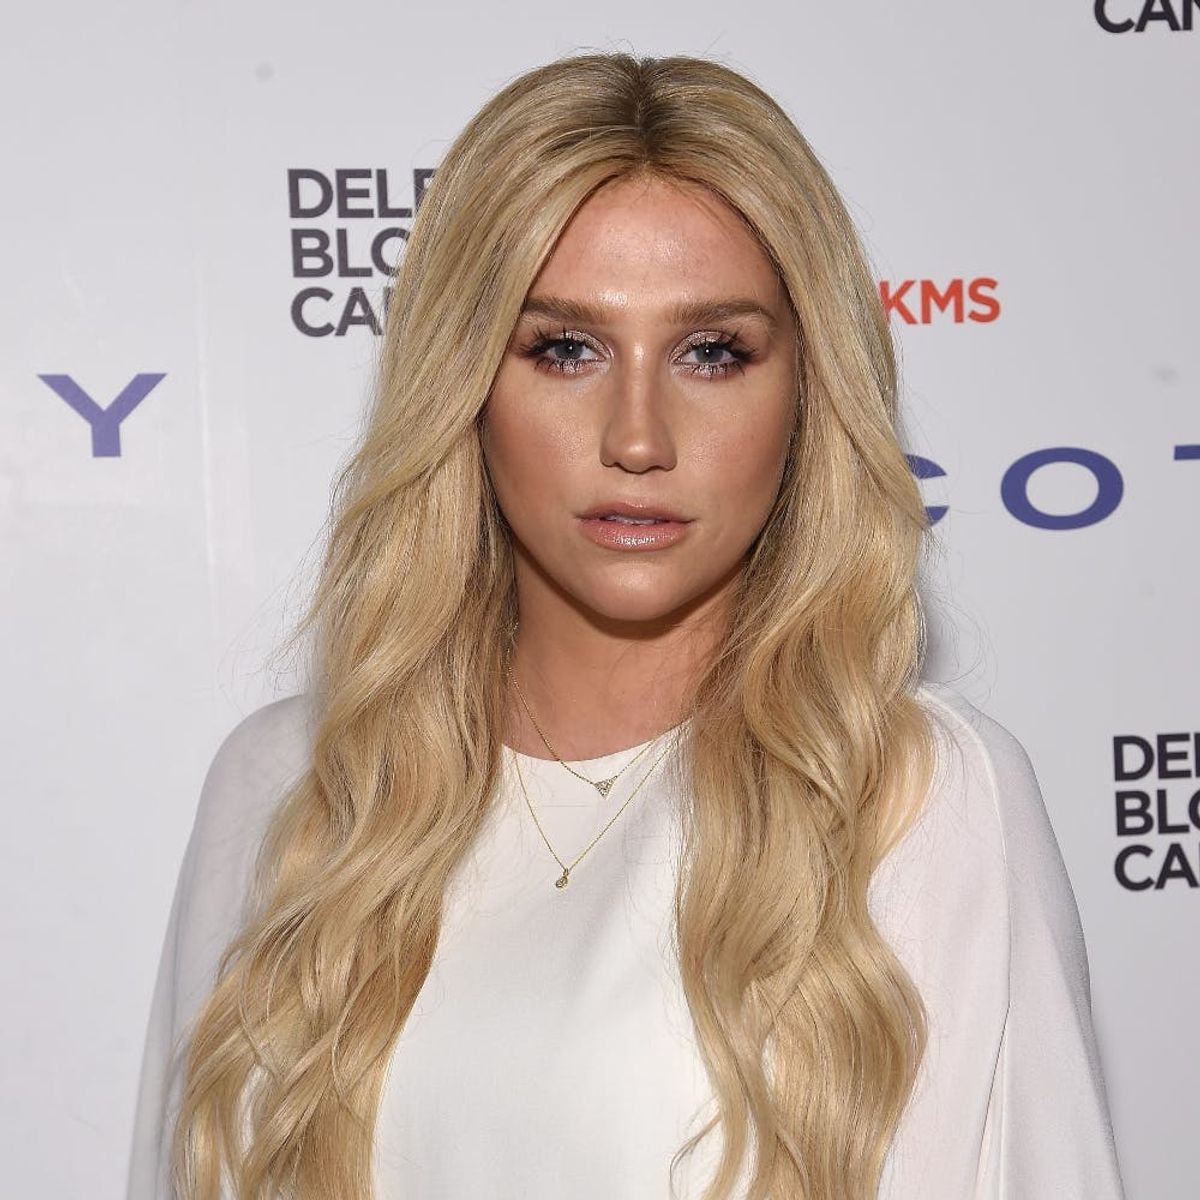 Kesha’s New “True Colors” Single Will Make You Cry (in the Best Kind of Way)